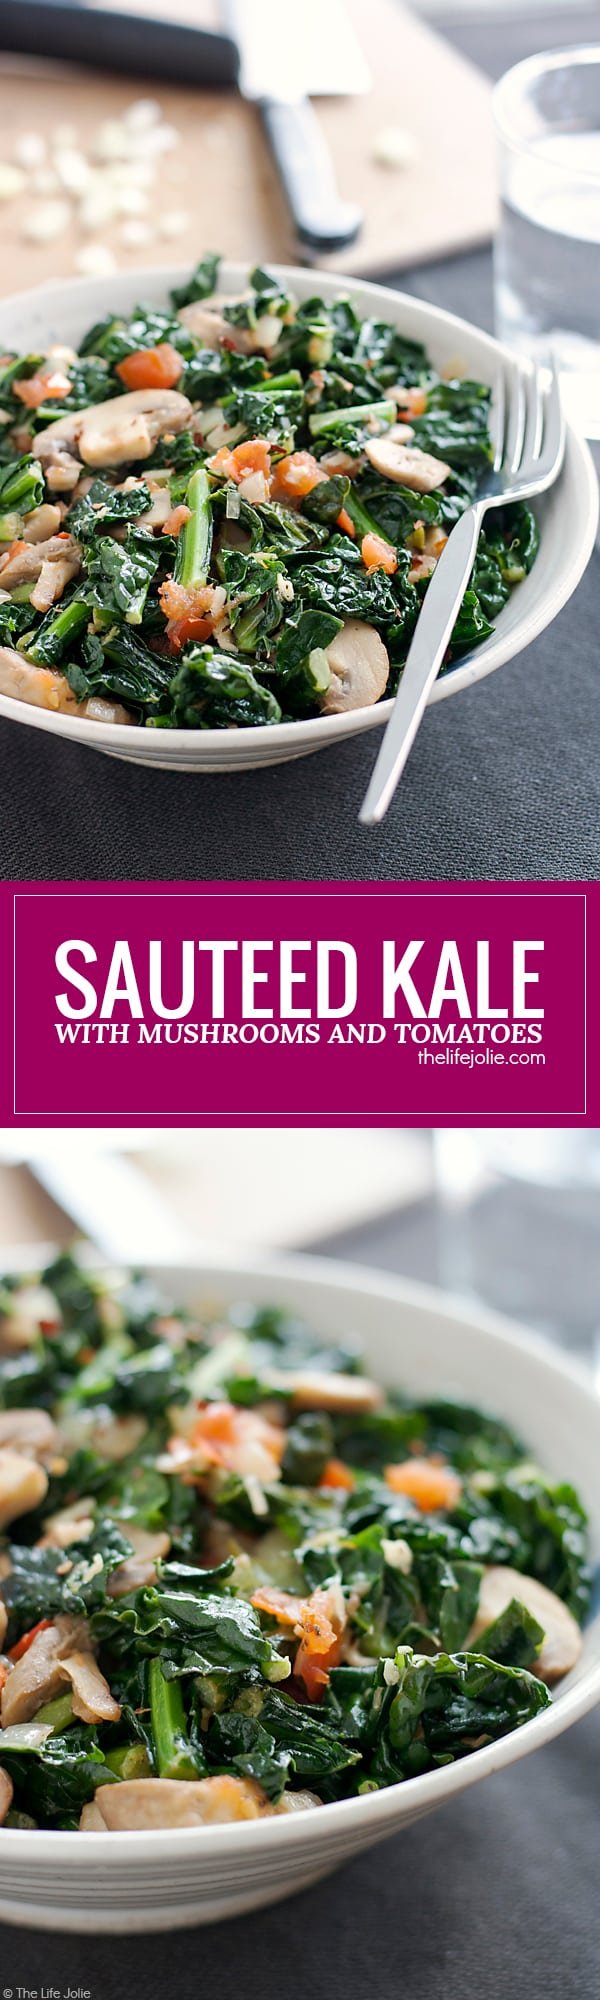 Sauteed Kale with Mushrooms and Tomatoes is the best healthy side dish. This also makes a great vegetarian main dish. I love to cook a big batch to eat with lunch or dinner- it's full of delicious flavor!